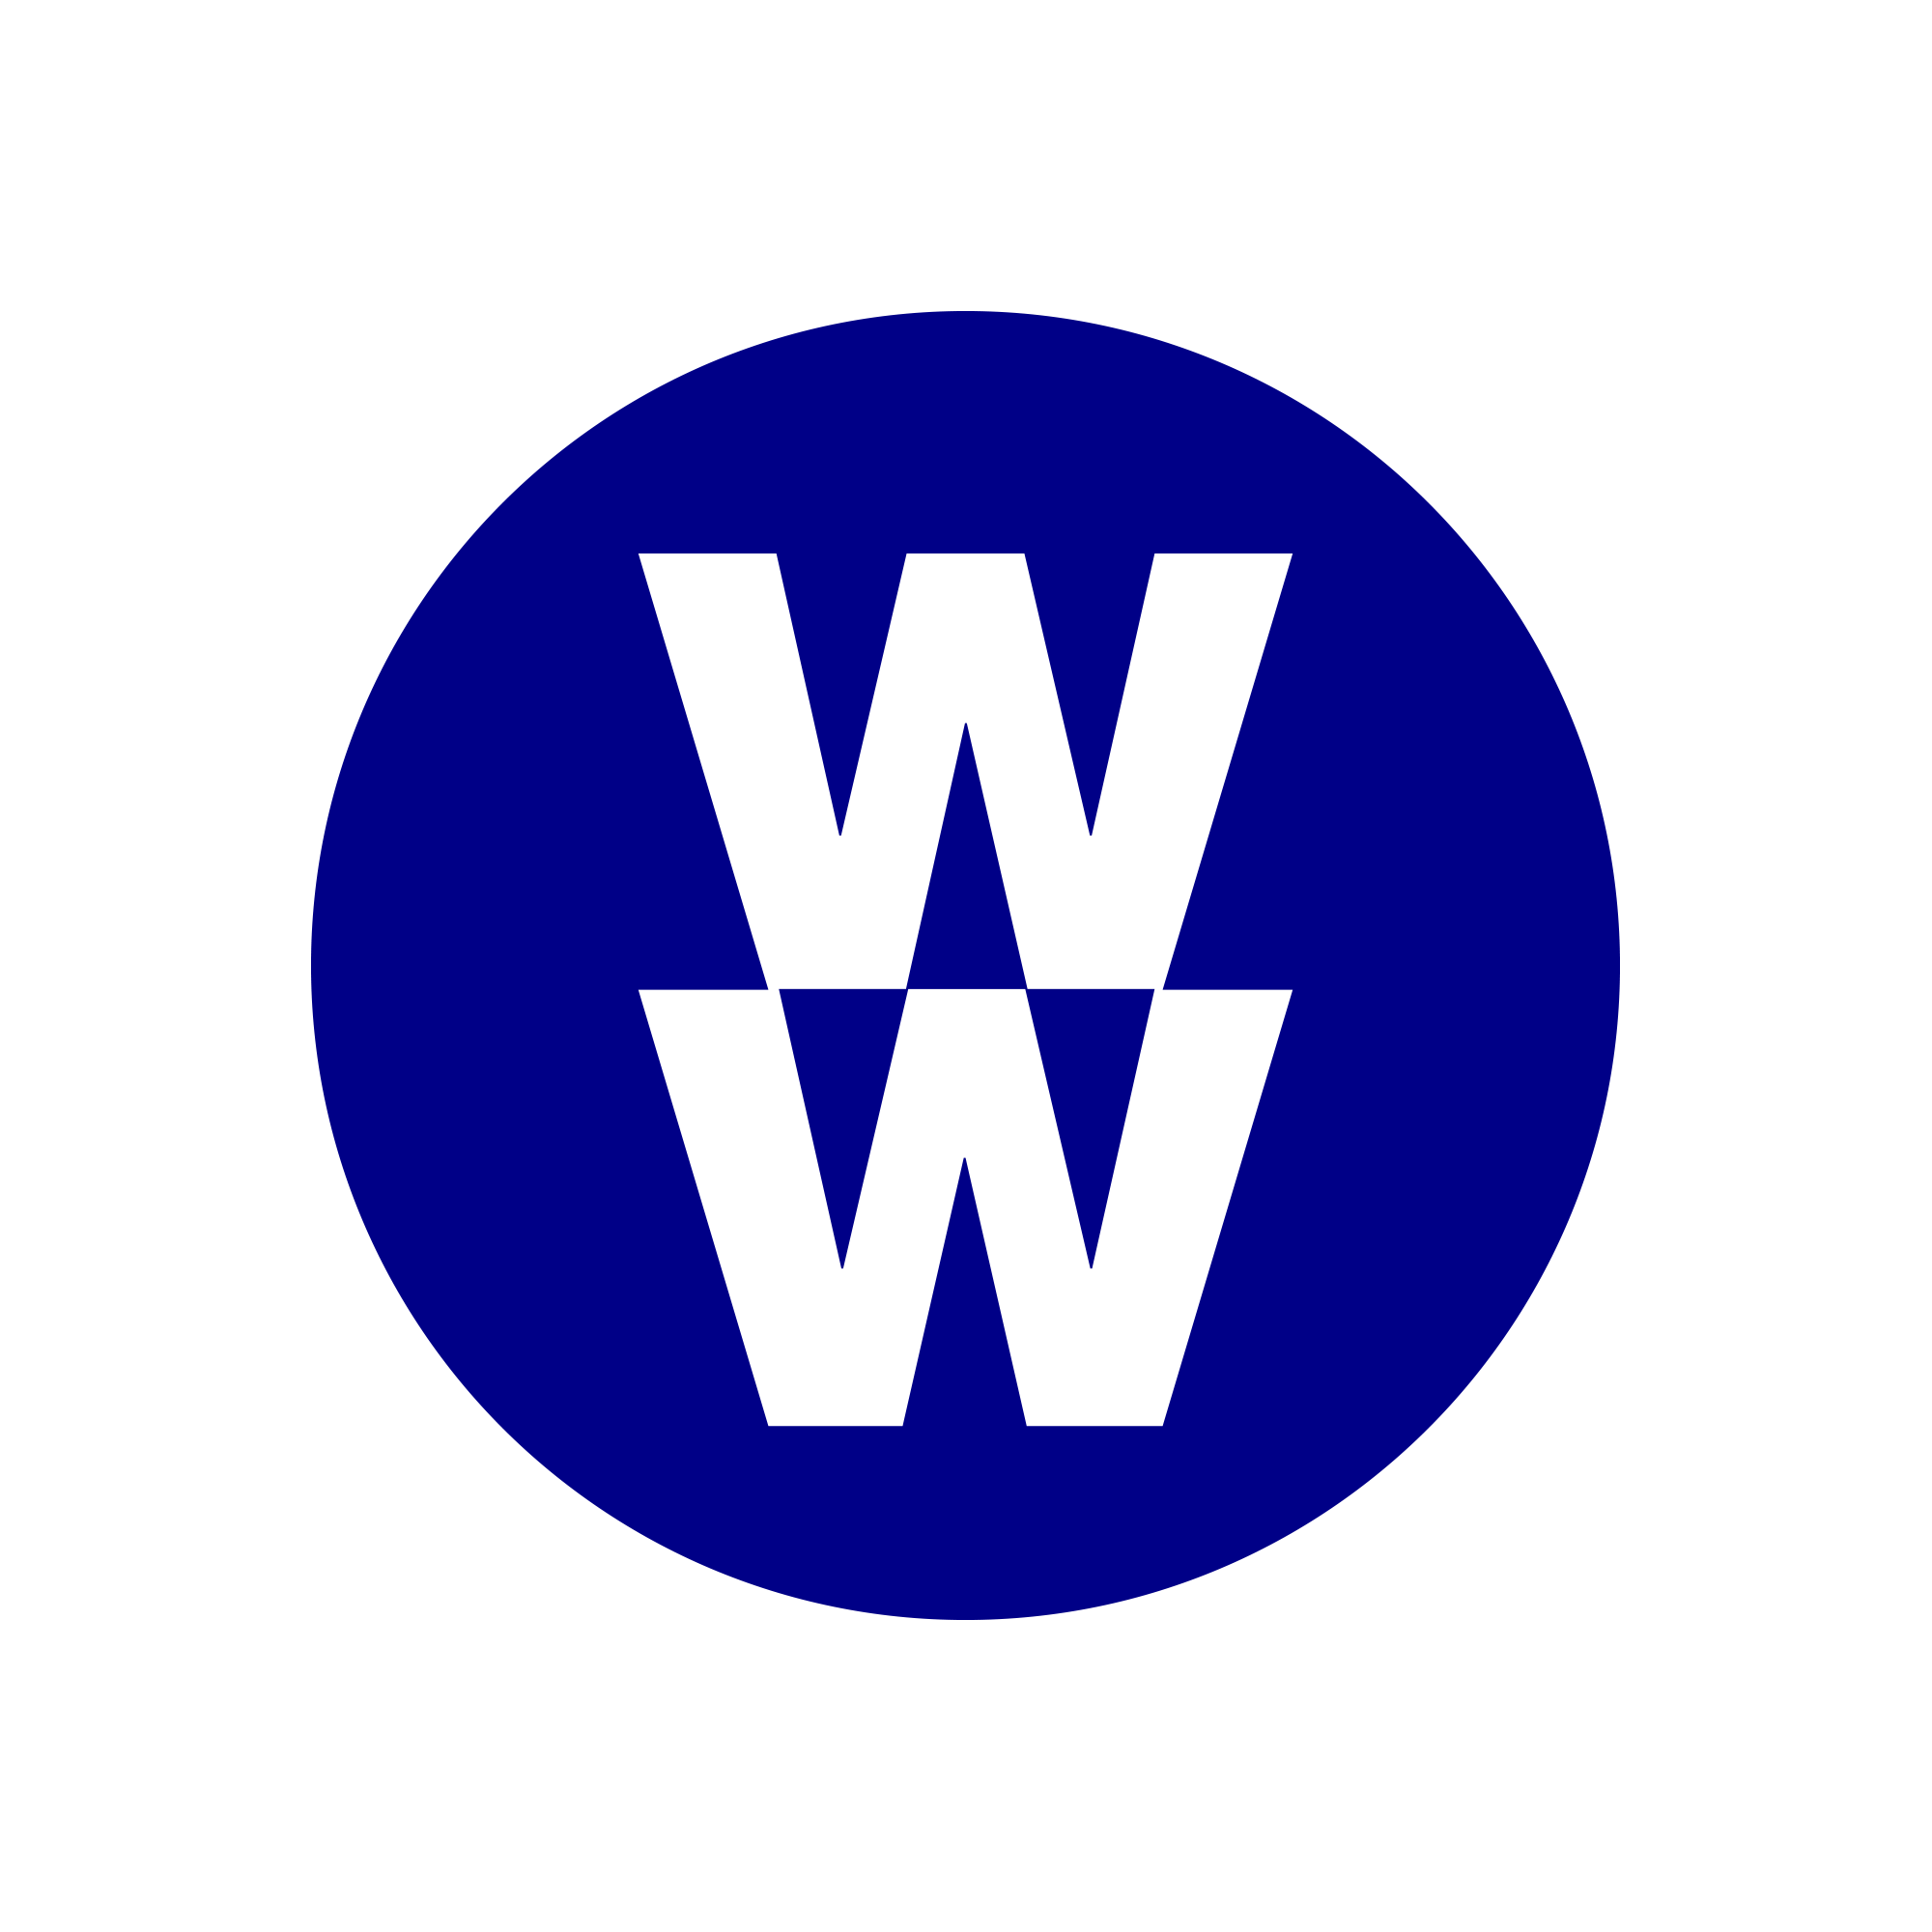 New Name and Logo for WW